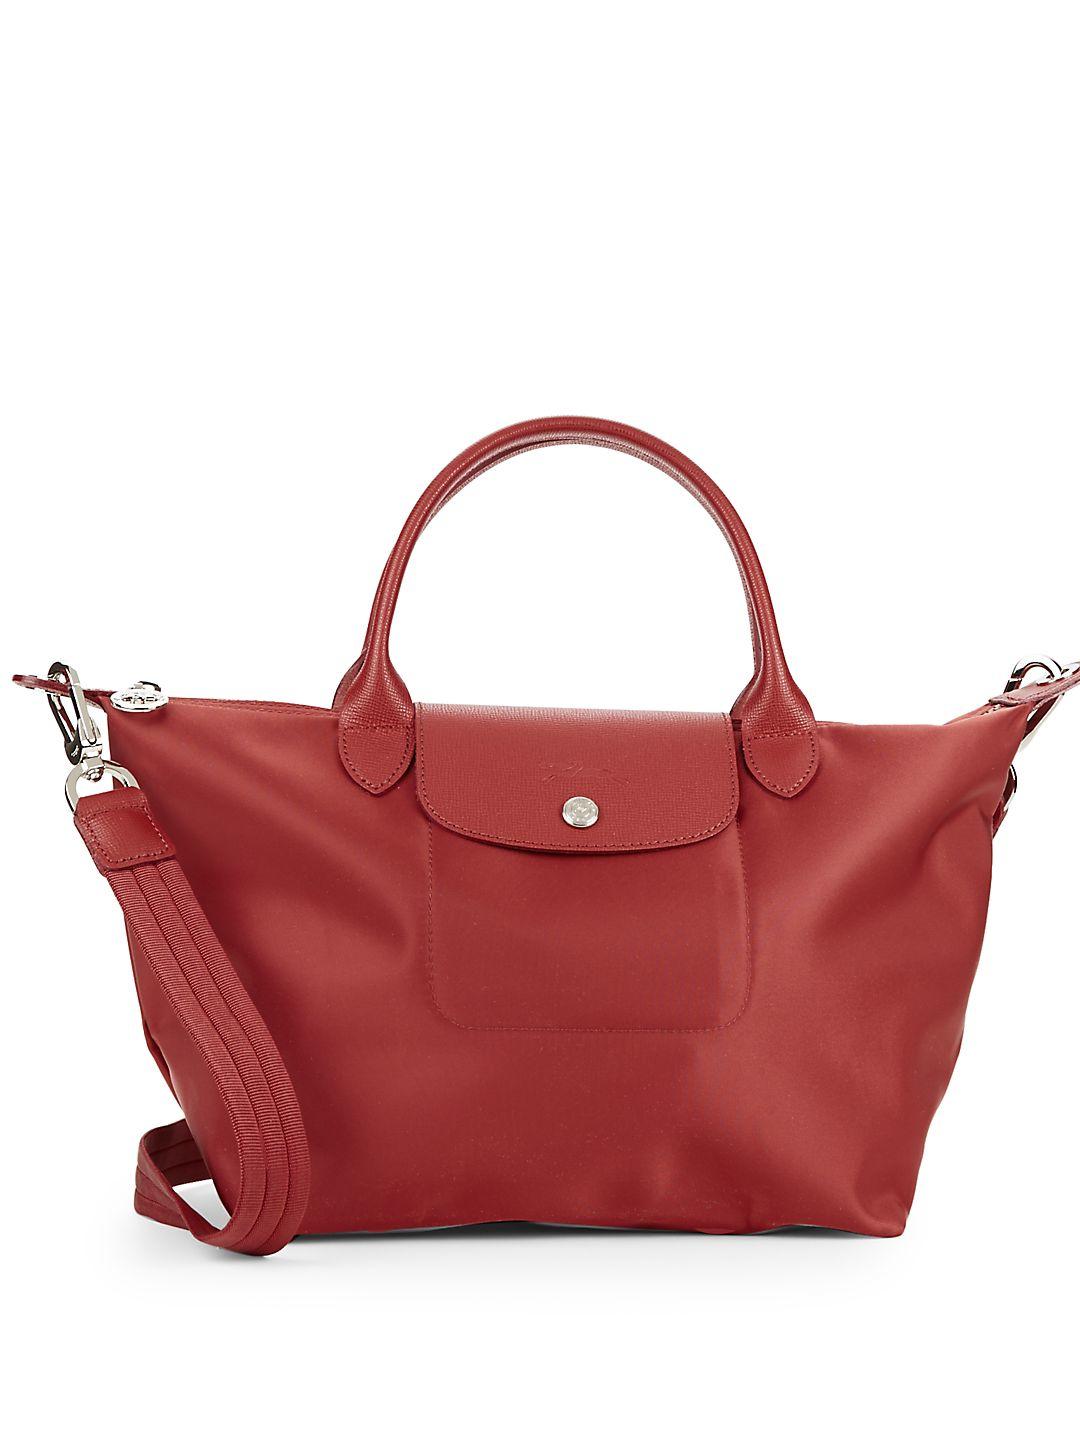 Longchamp Le Pliage Neo Small Top Handle Bag in Red